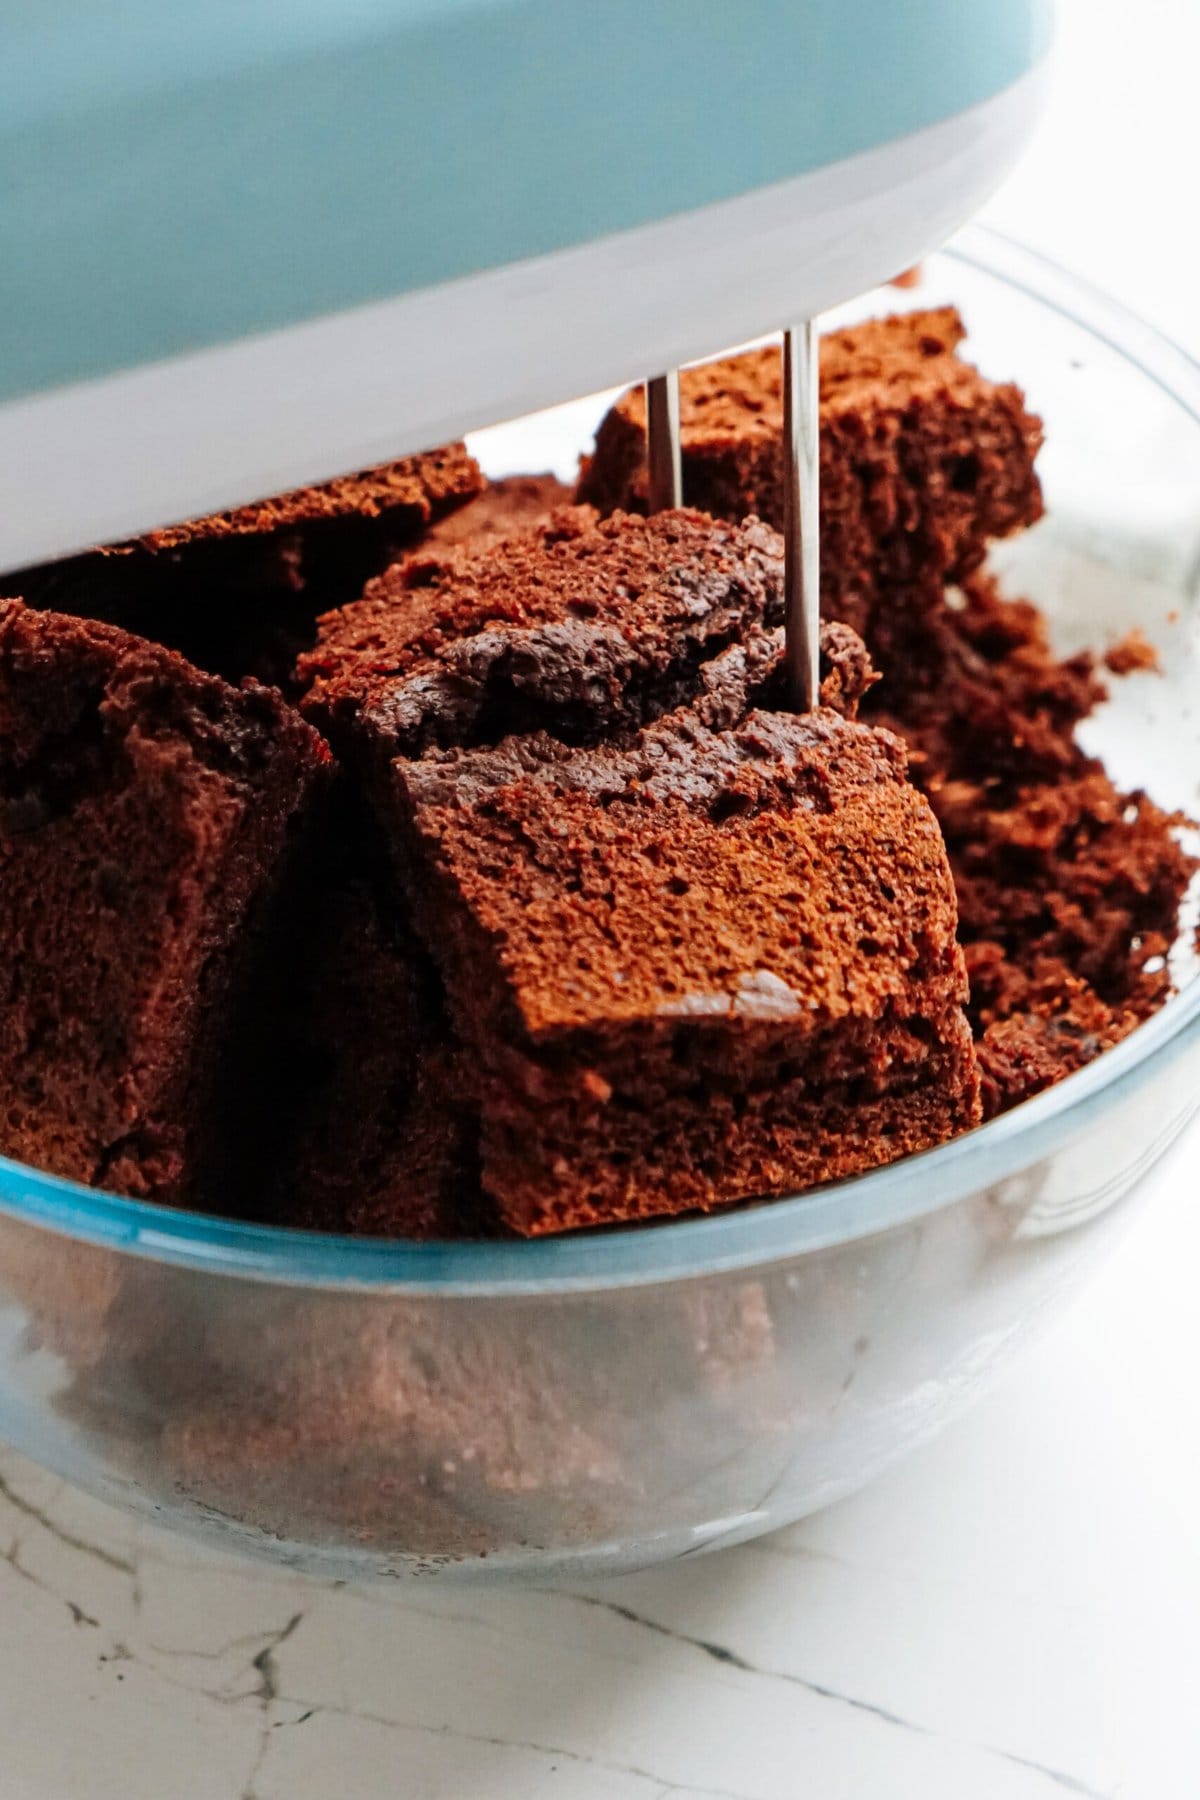 Chocolate cake pieces in a bowl with a mixer.